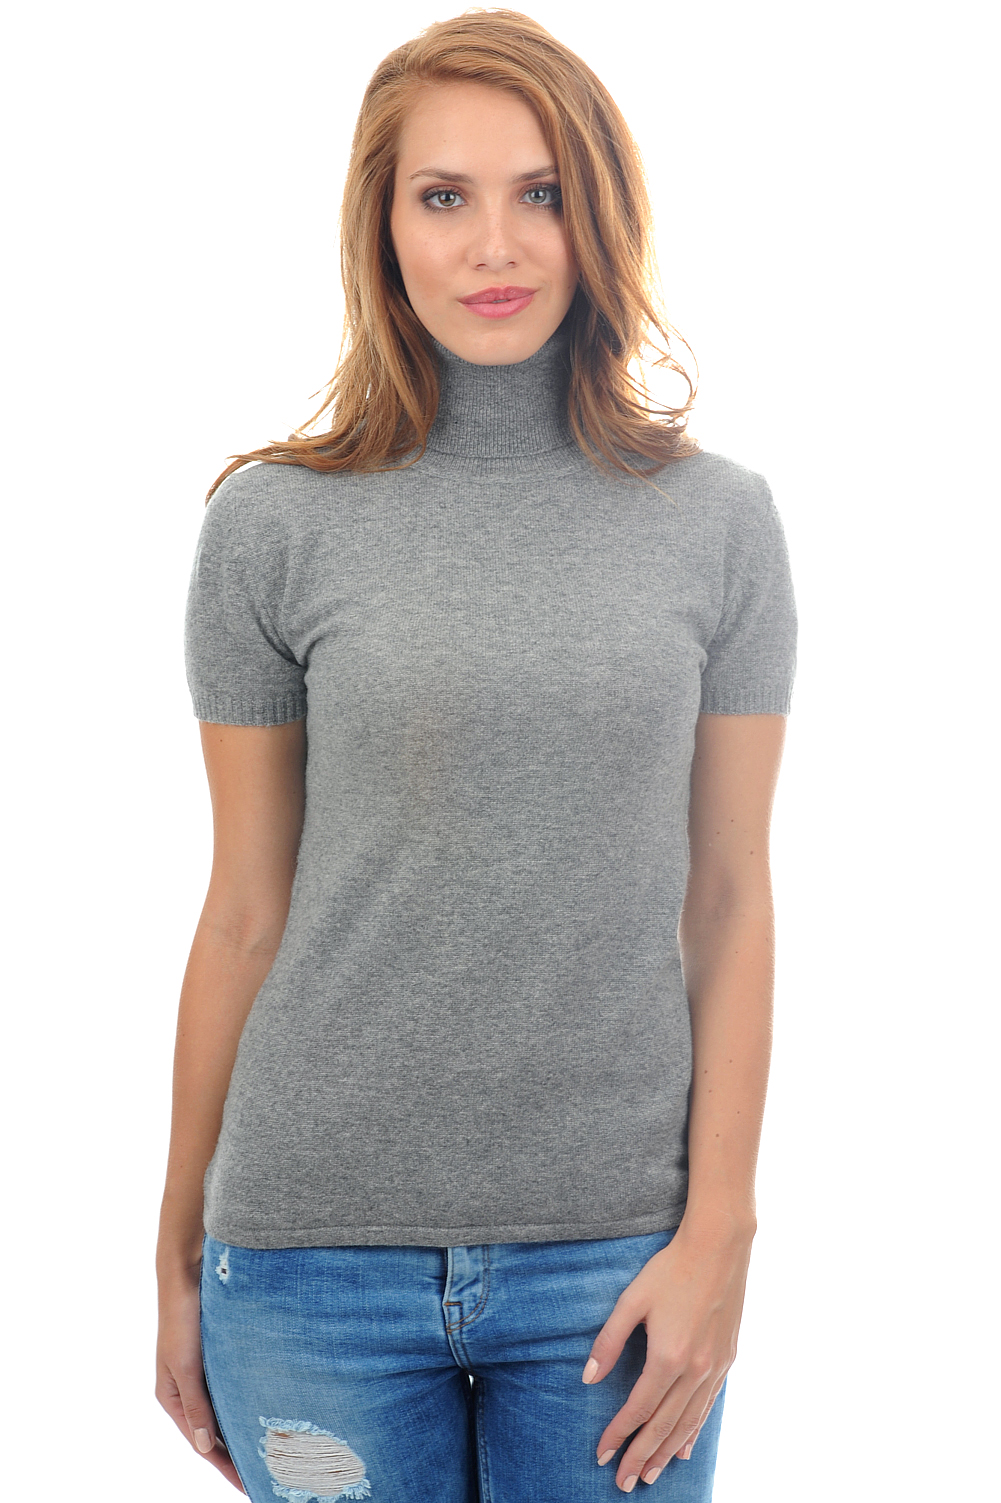 Cachemire pull femme col roule olivia gris chine 2xl